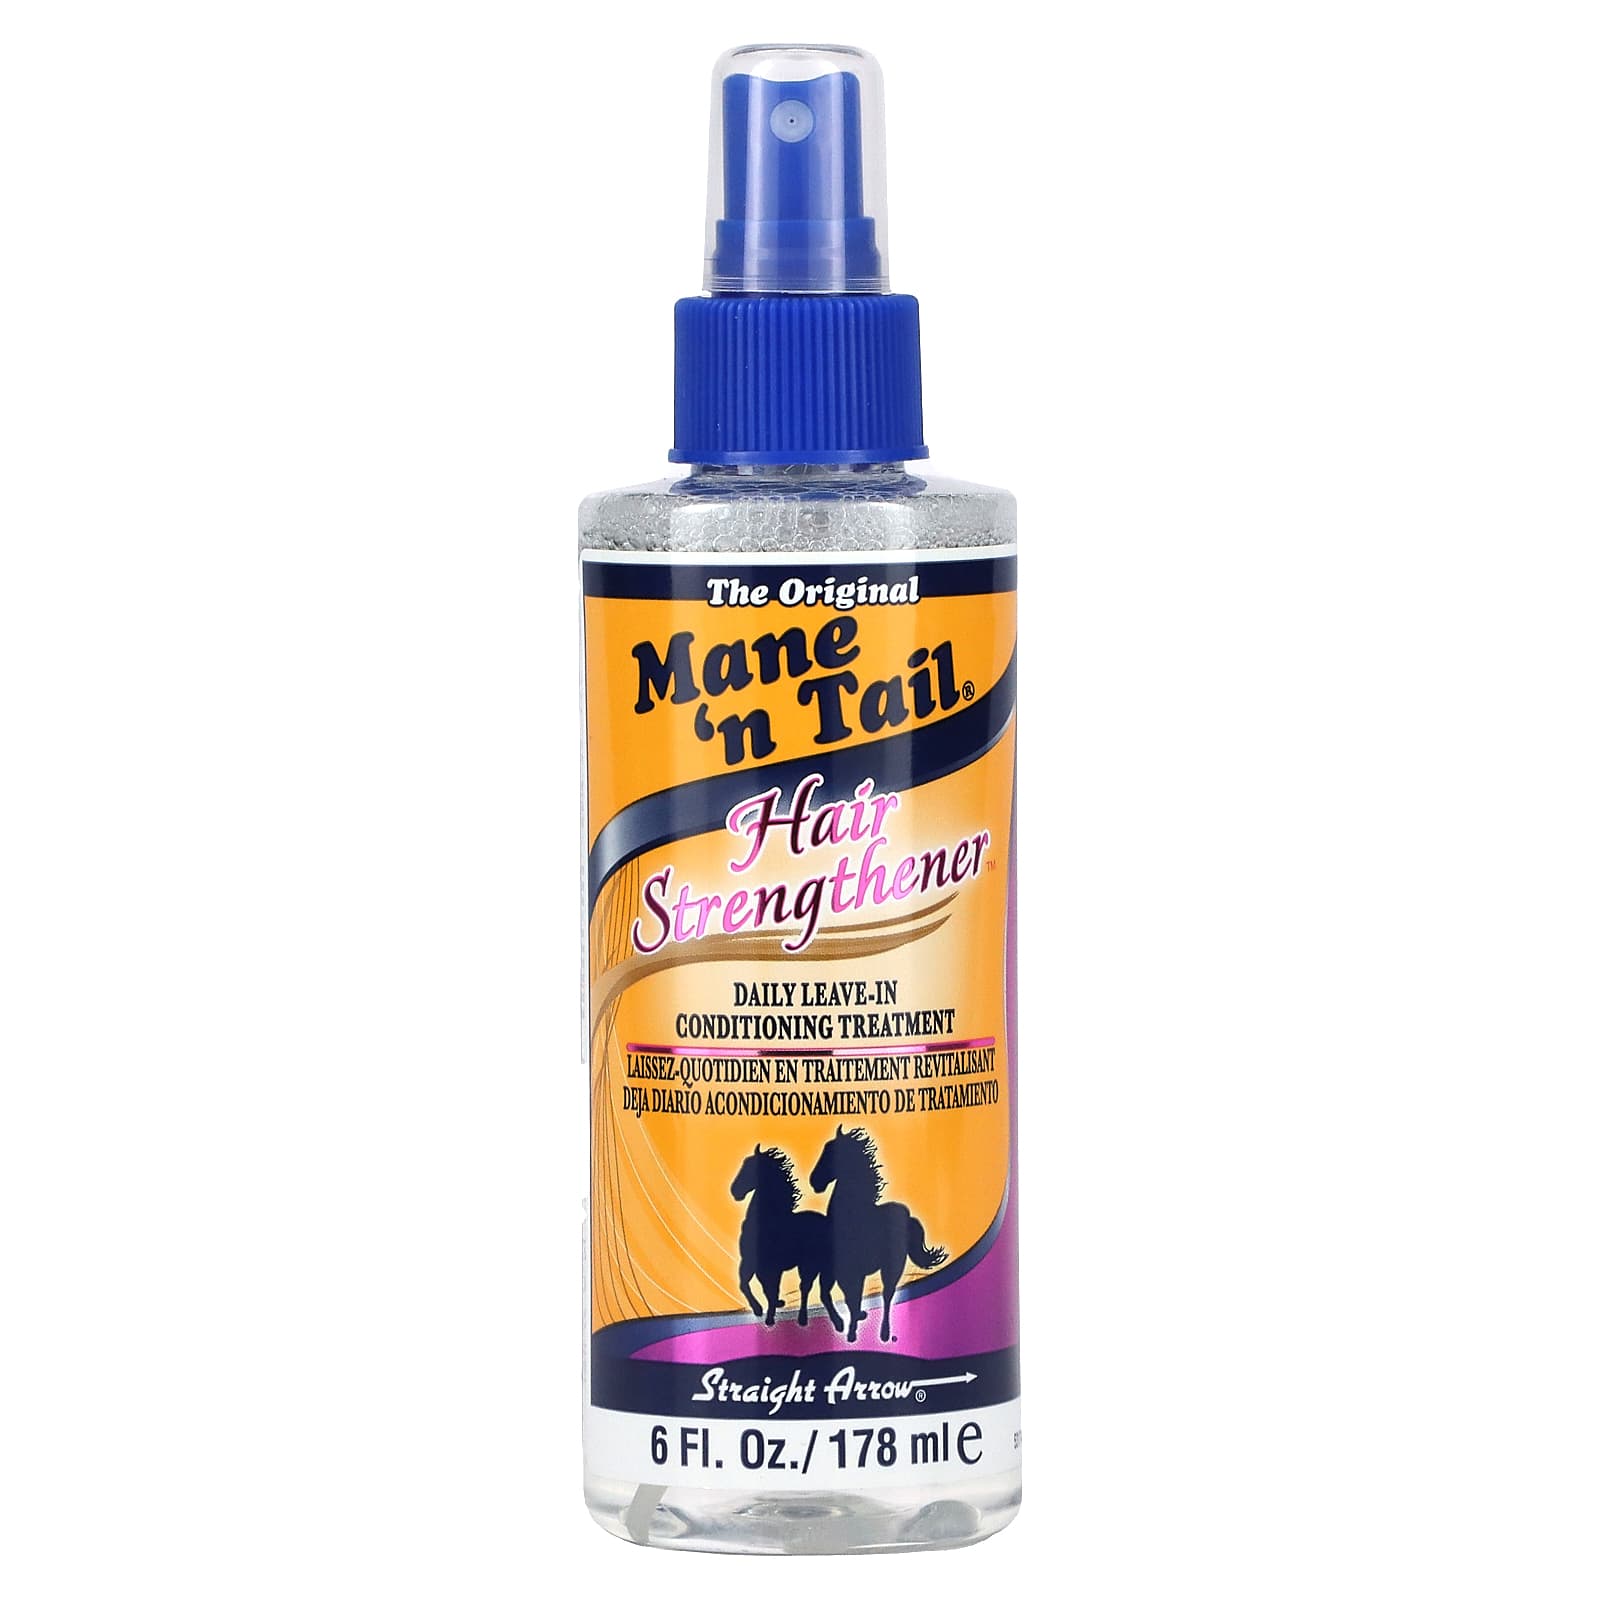 Mane 'n Tail Hair Strengthener Daily Leave-In Conditioning Treatment - 6 fl oz (178 ml)